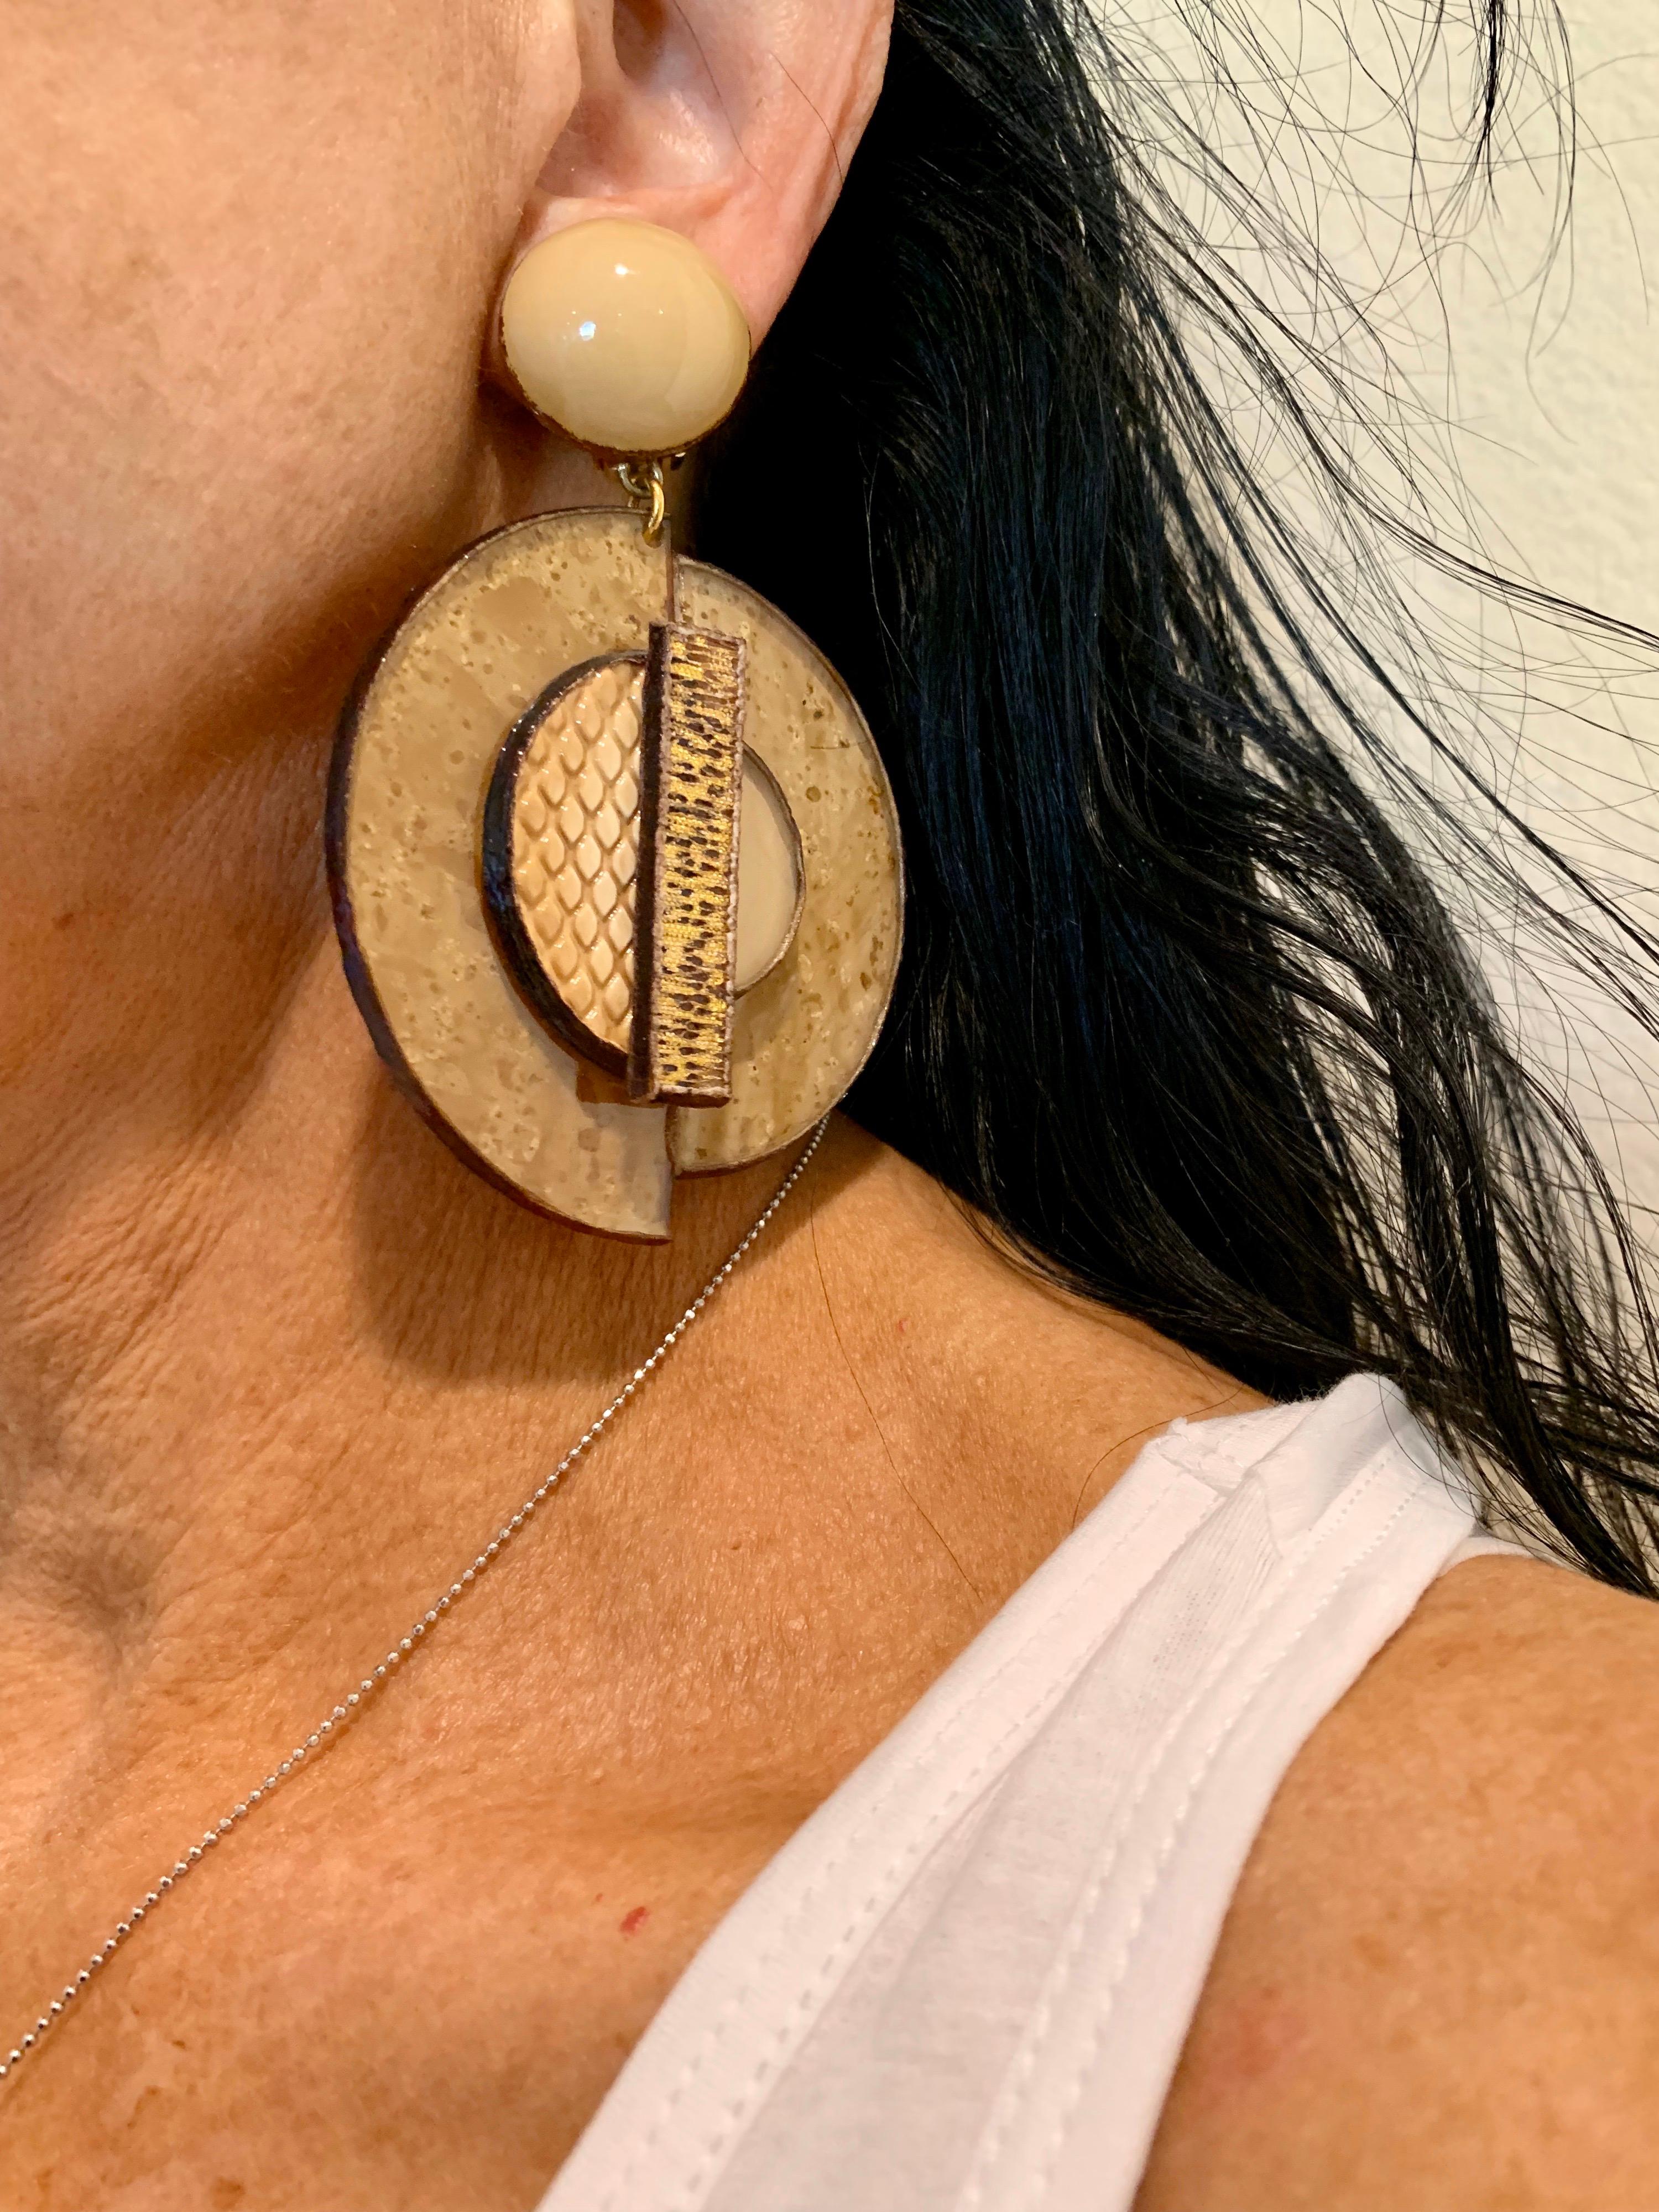 Light and easy to wear, these handmade artisanal circle clip-on earrings were made in Paris by Cilea. The earrings are comprised out of gold enameline (resin and enamel composite) and depict three-dimensional pop art circles. Throughout the earrings